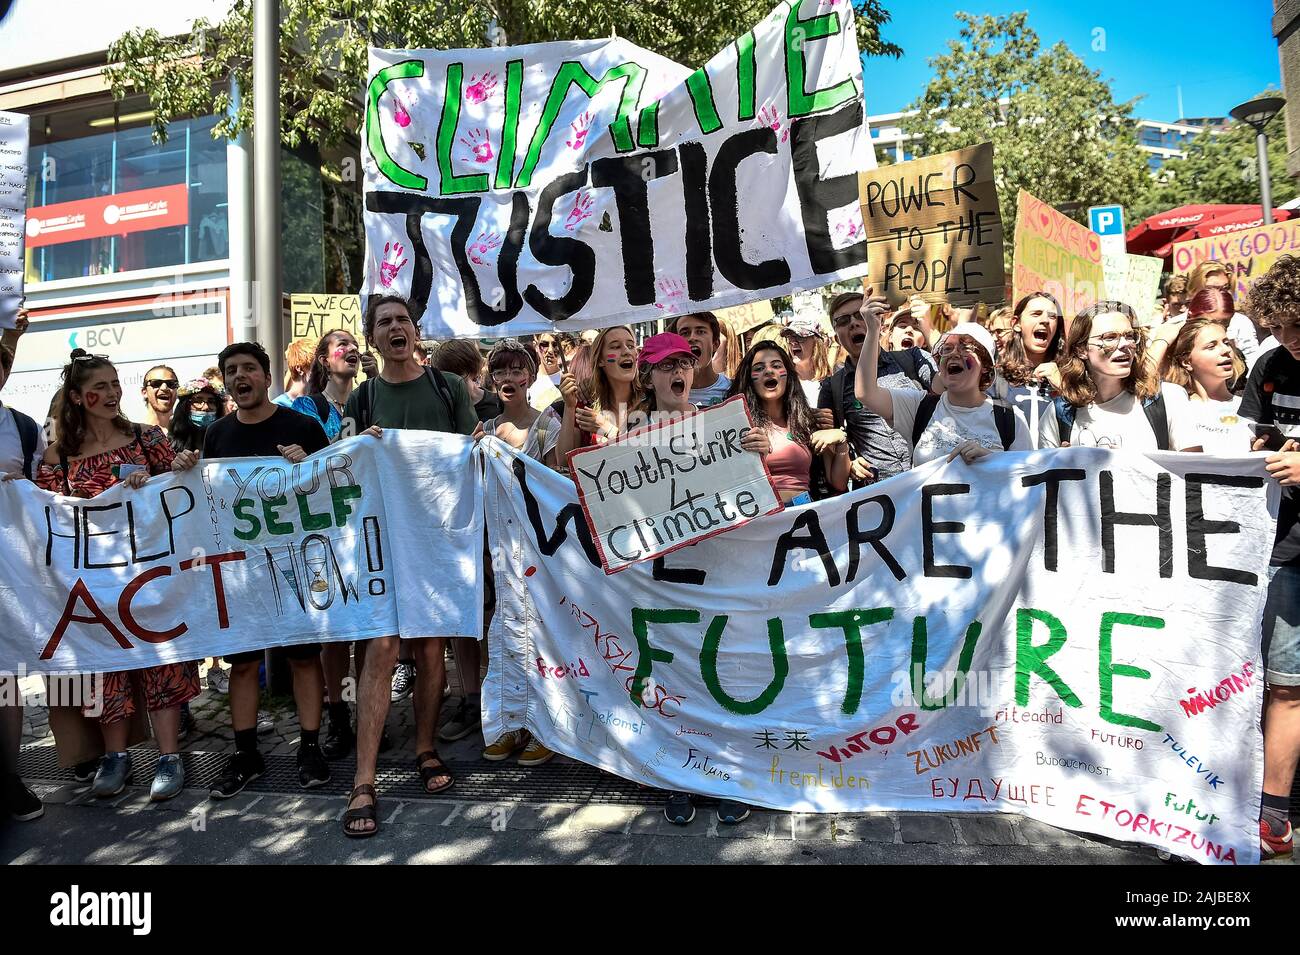 Lausanne, Switzerland - 09 August, 2019: Climate activists hold banners  reading 'Help yourself act now', Climate justice', 'We are the future'  during a Fridays For Future strike for climate protection that is